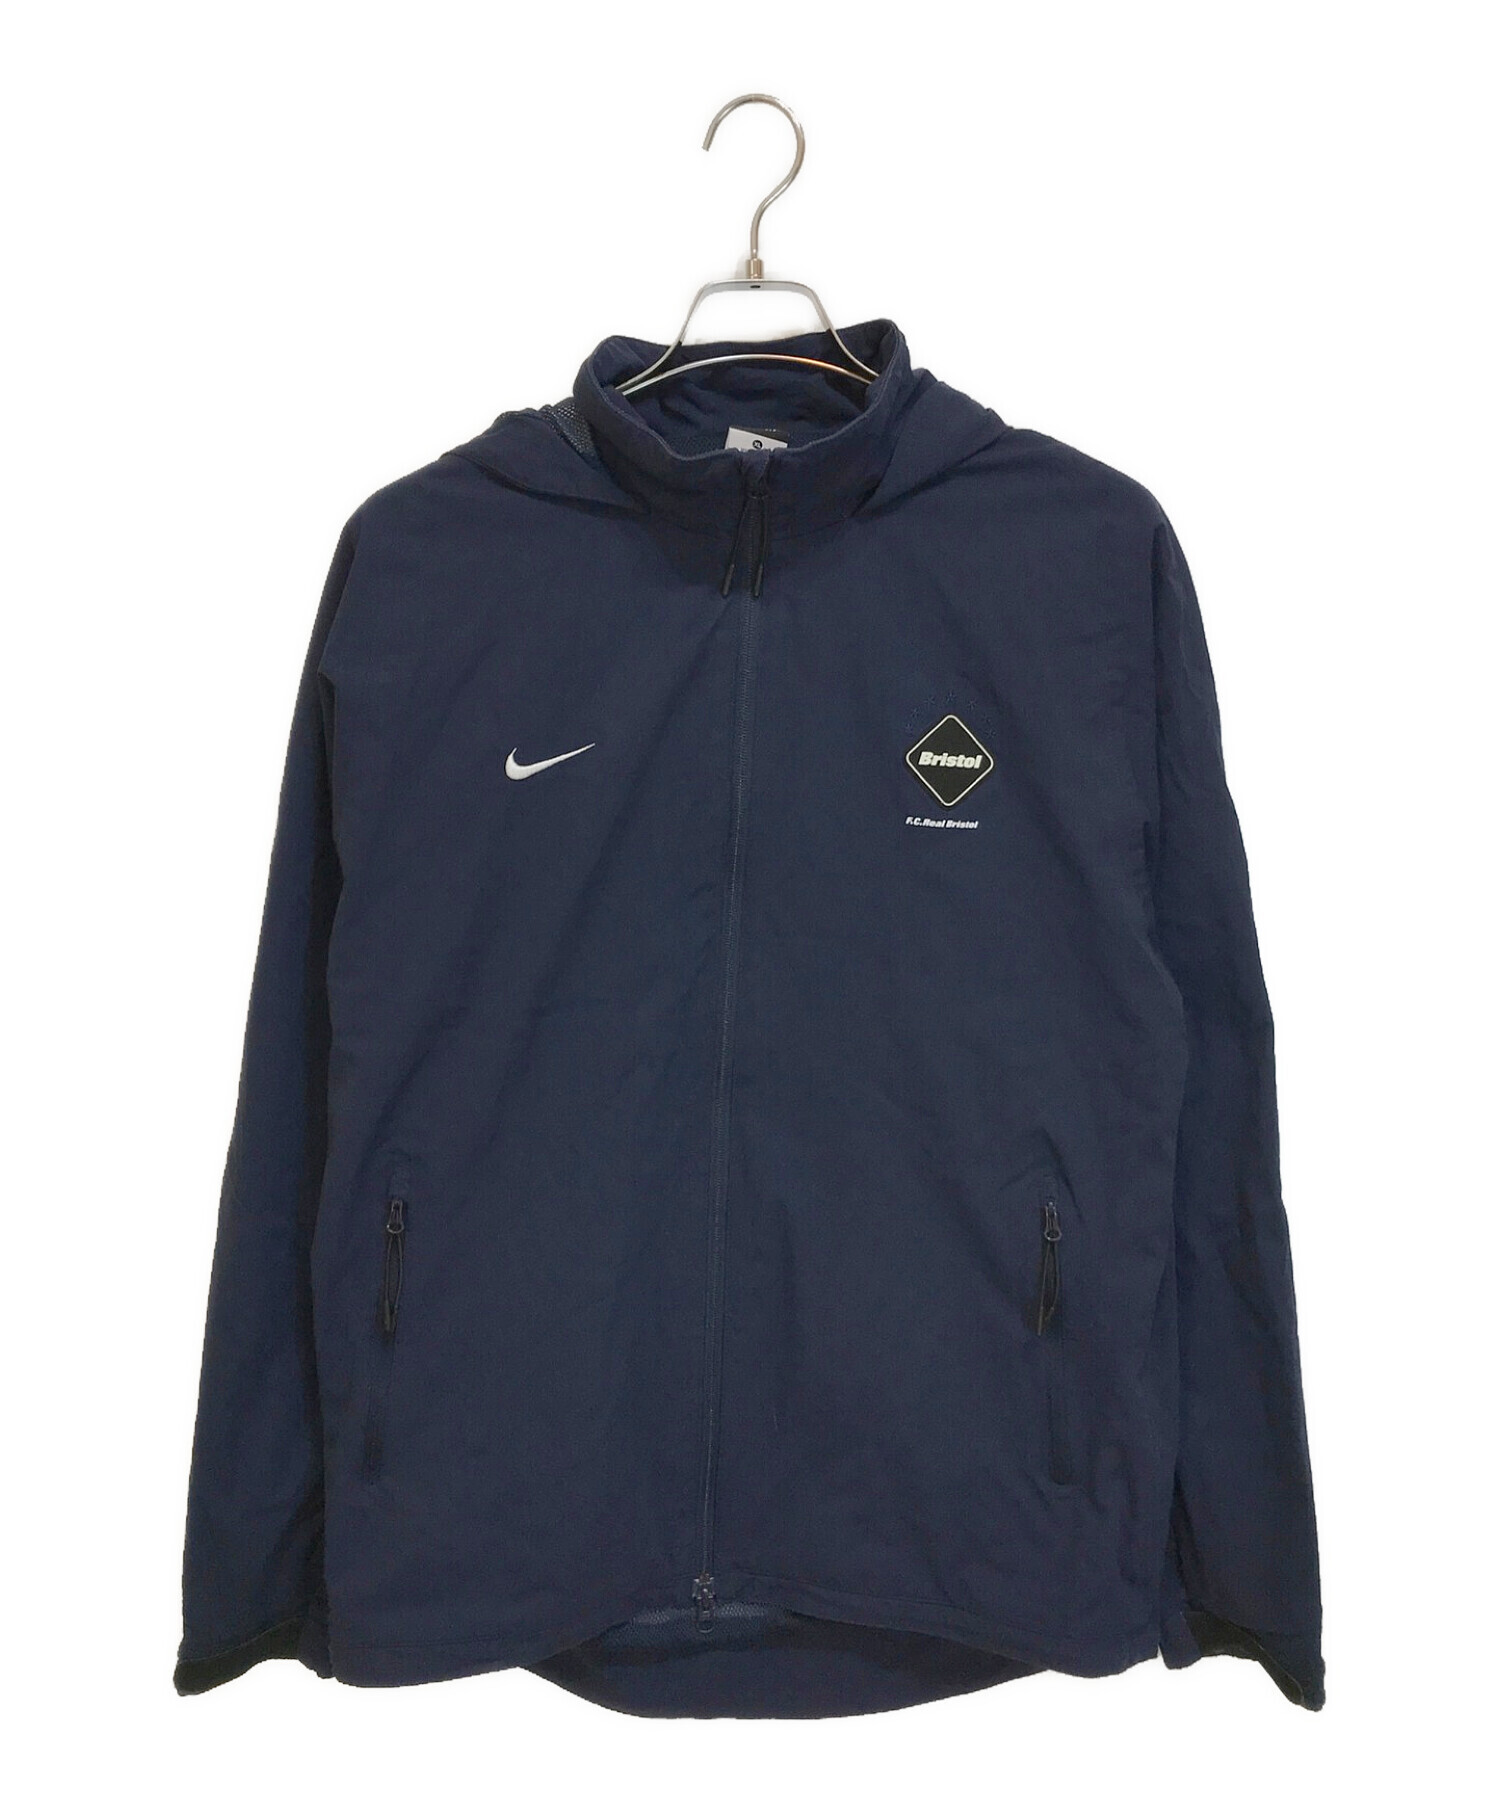 FCRB NIKE STORM-FIT JACKET